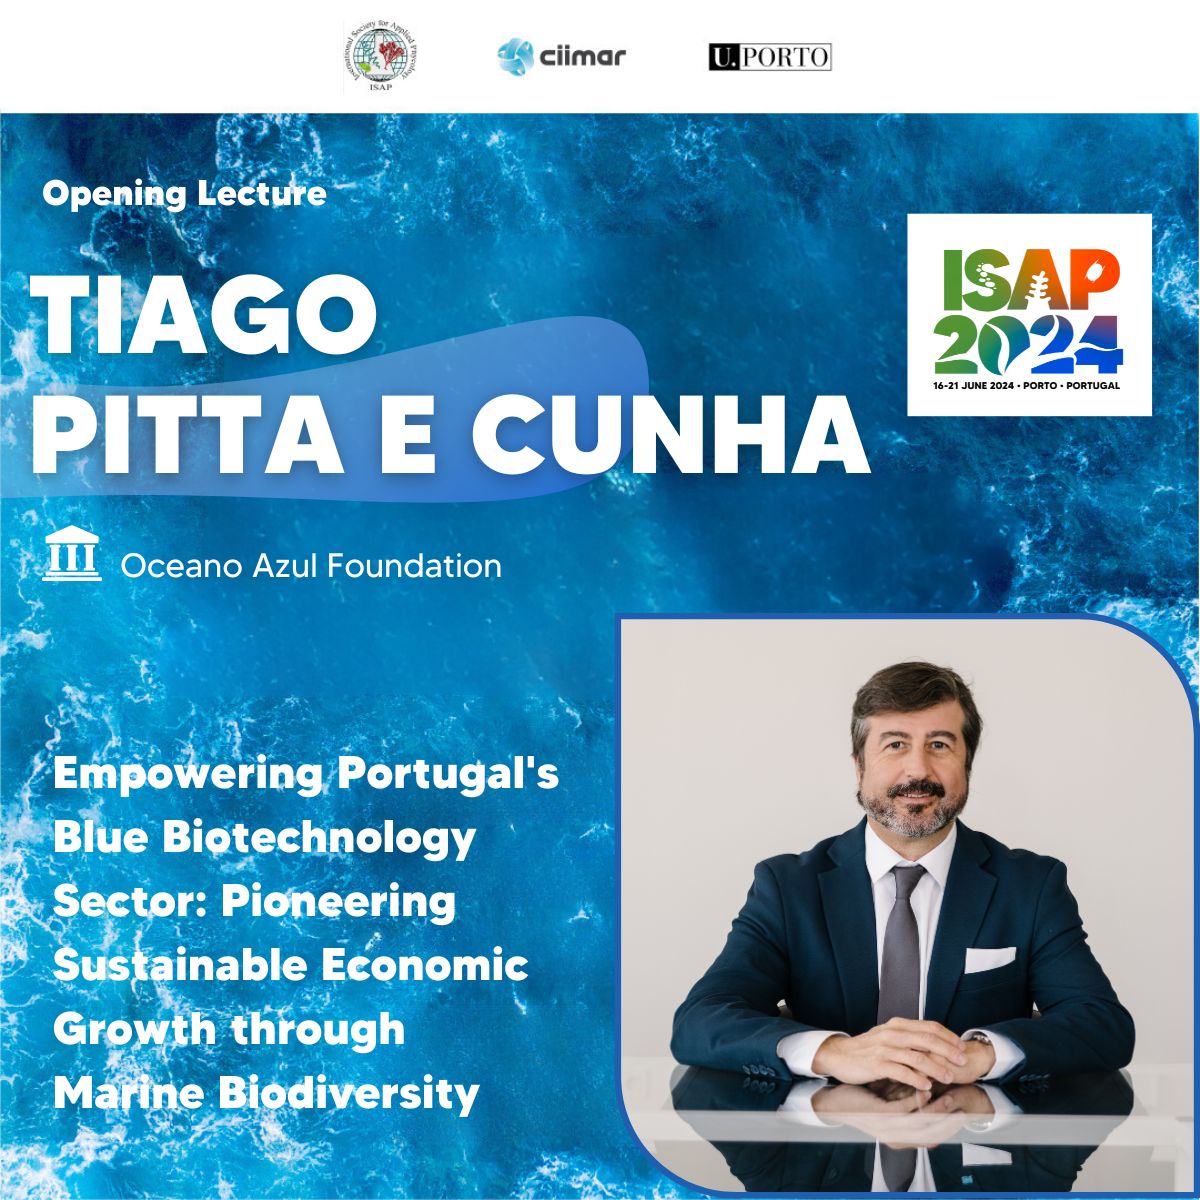 #ISAP2024 starts with 'Empowering Portugal's Blue Biotechnology Sector: Pioneering Sustainable Economic Growth through Marine Biodiversity.' Led by Tiago Pitta e Cunha (@OceanoAzulF). Register now! 👉isap2024.com #CIIMARevents